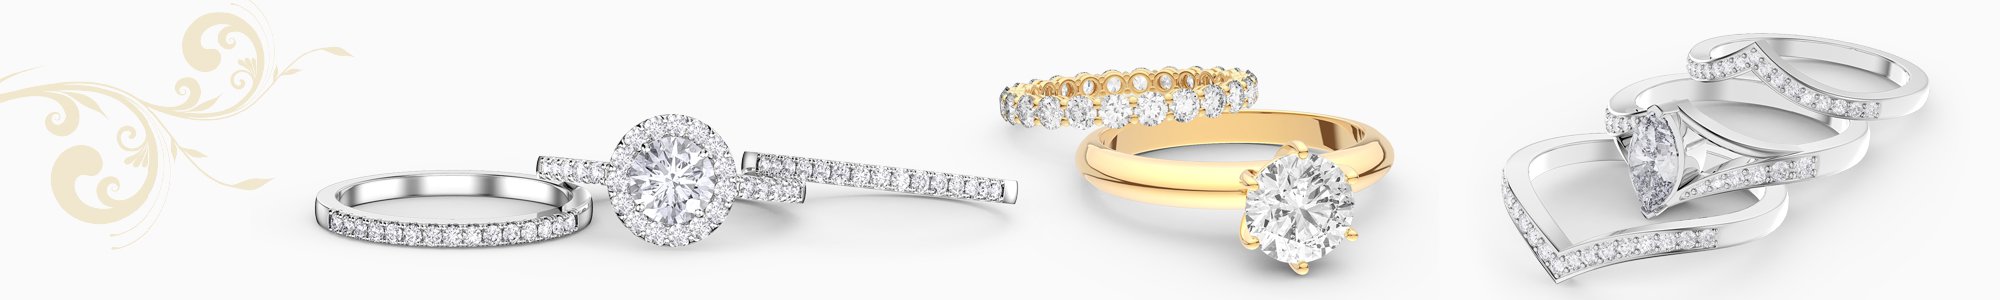 Shop for Bridal Ring Sets by Jian London Choose from our great selection direct from the Jian London Jewelry Store. Free US Delivery.